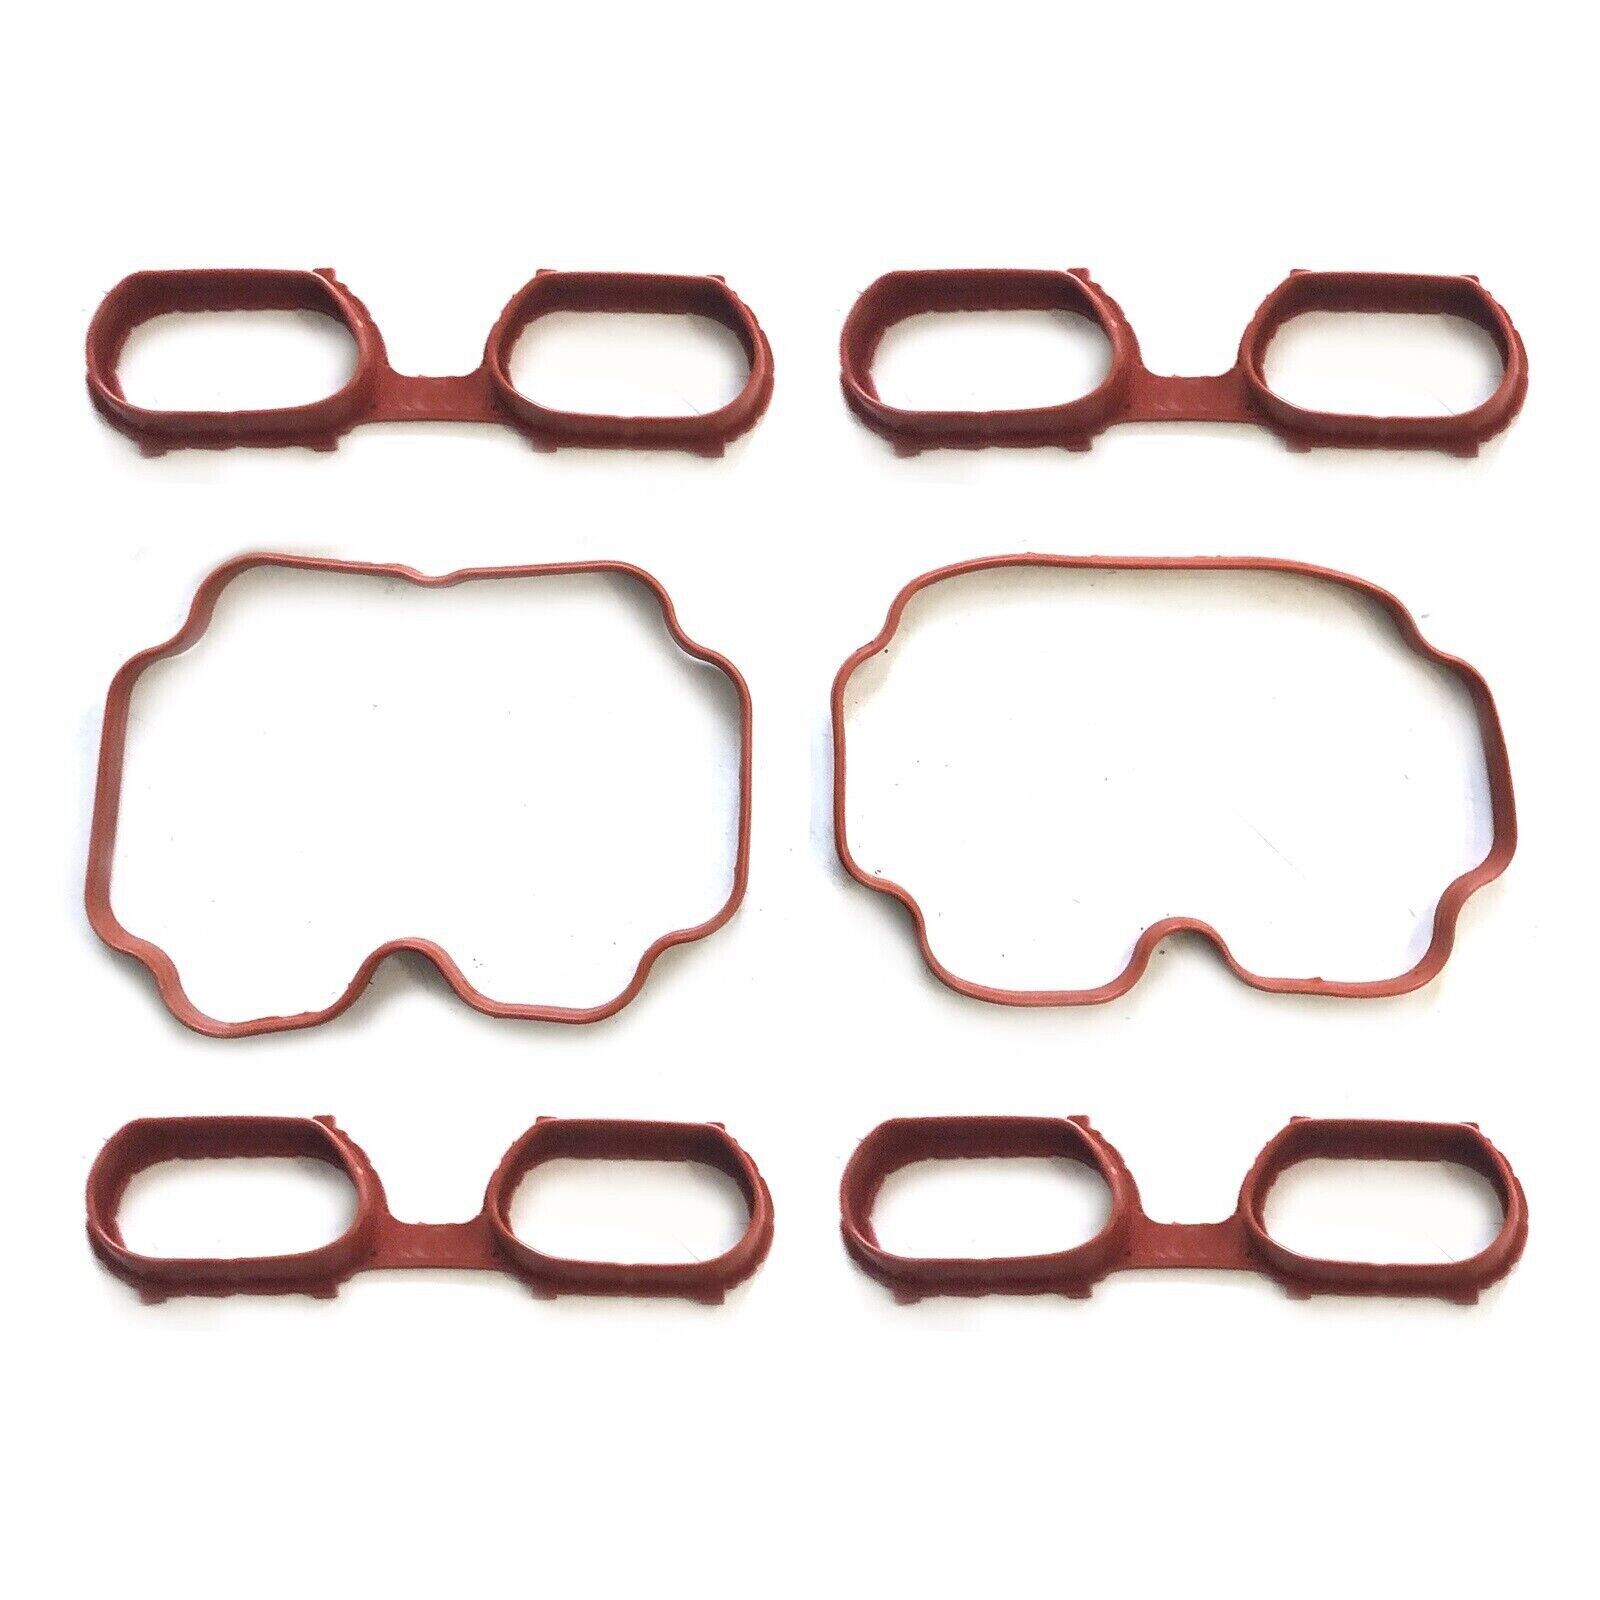 Intake Manifold Gasket for BMW 540i X5 740iL 840Ci Land Rover Range Rover 4.4L